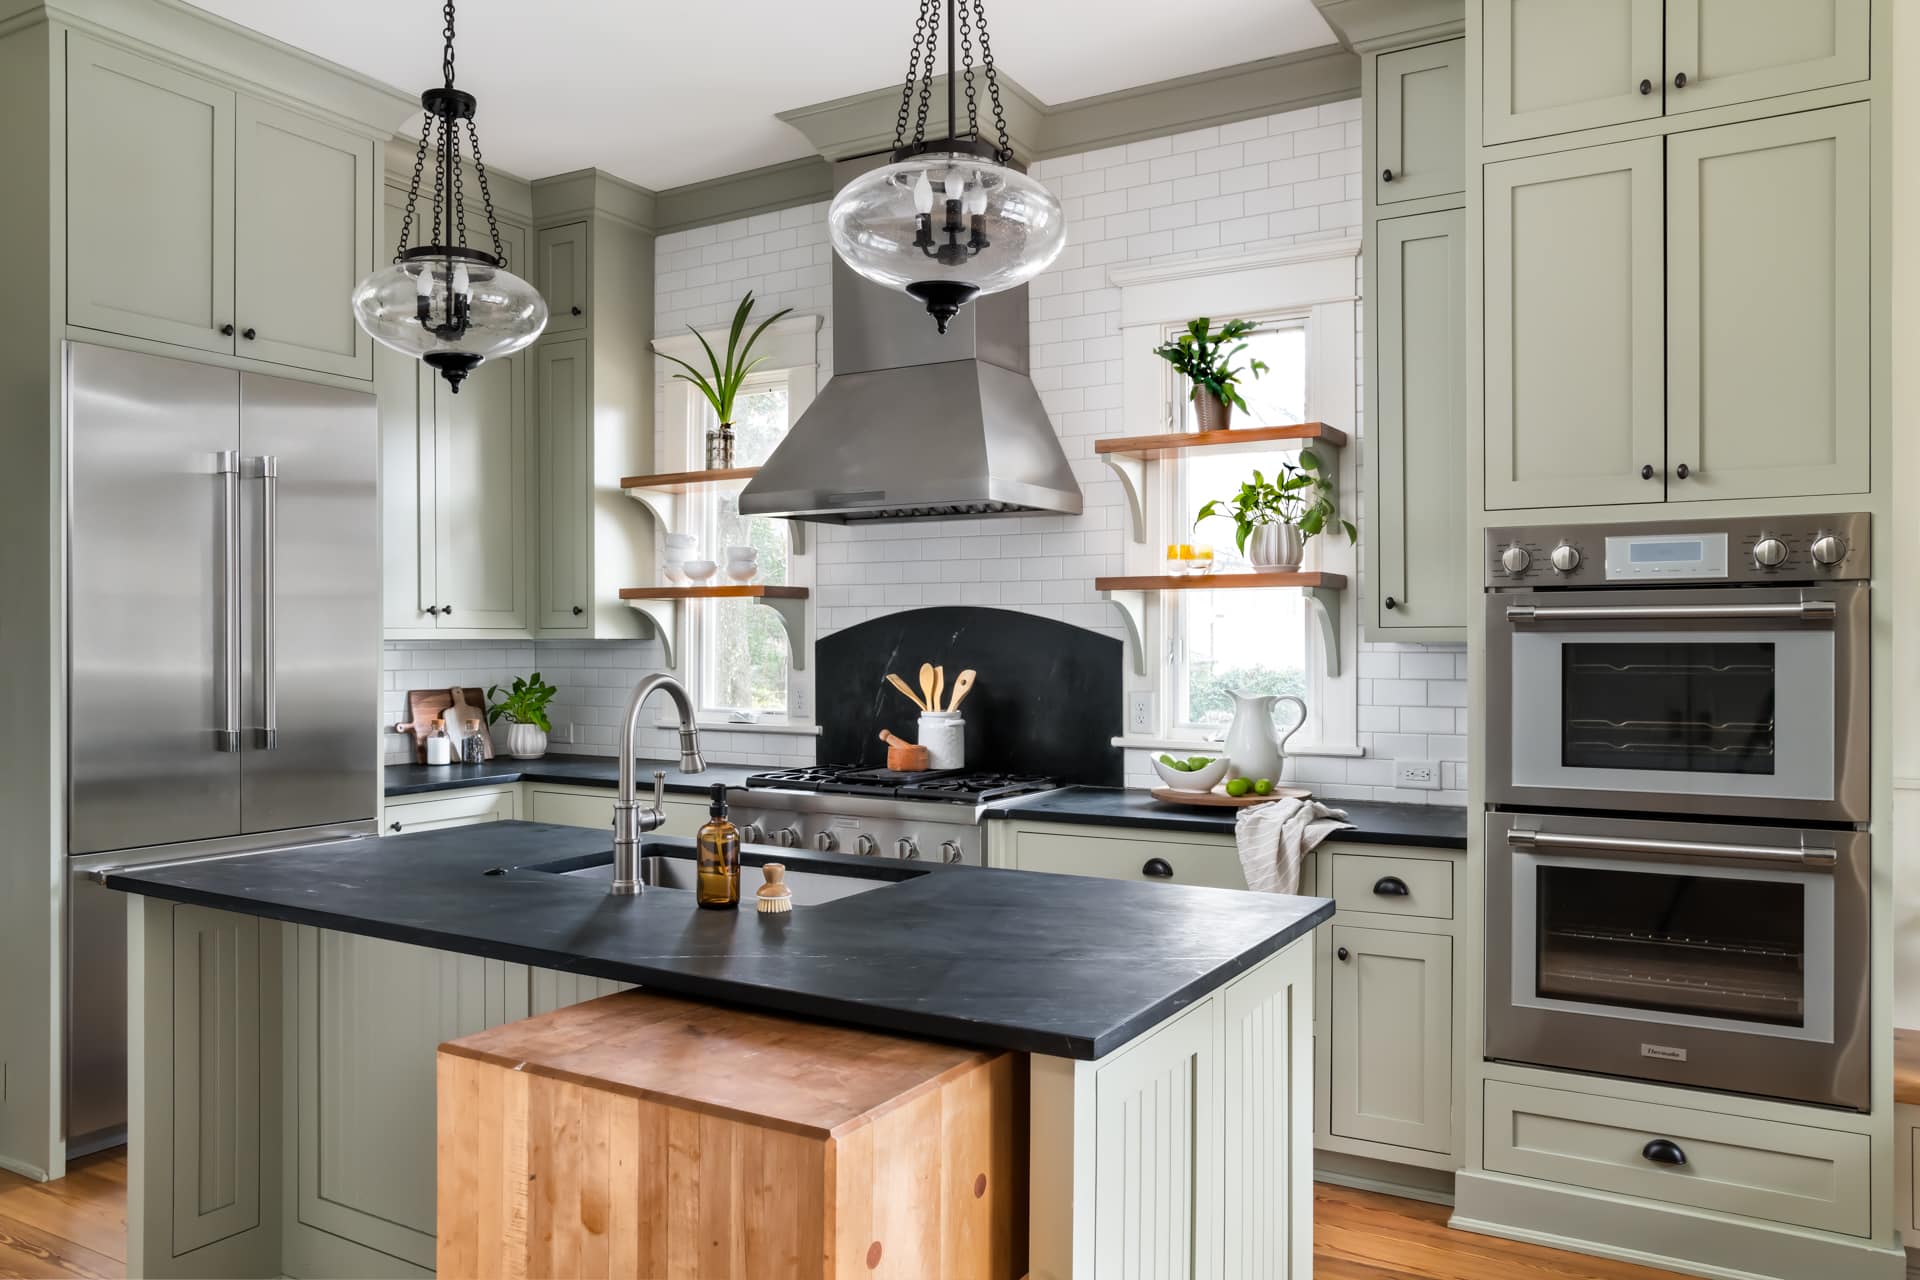 Modern farmhouse kitchen with an island, open shelves, and custom cabinetry.